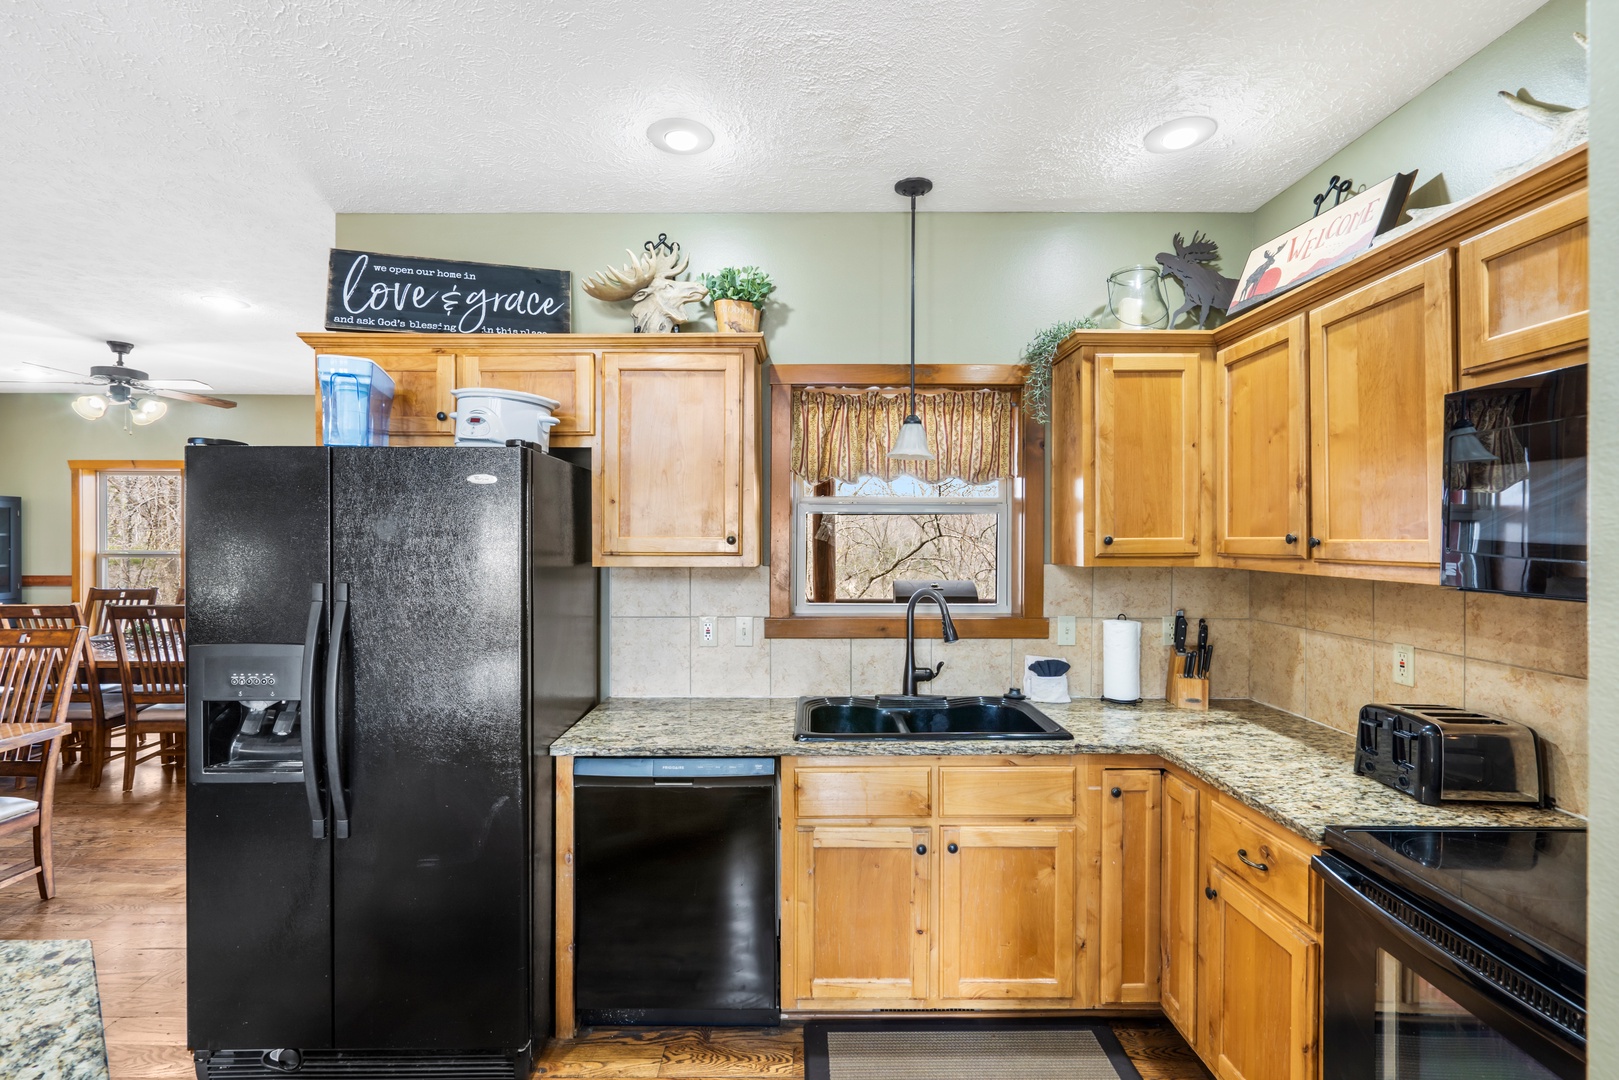 The open, inviting kitchen offers ample space & all the comforts of home